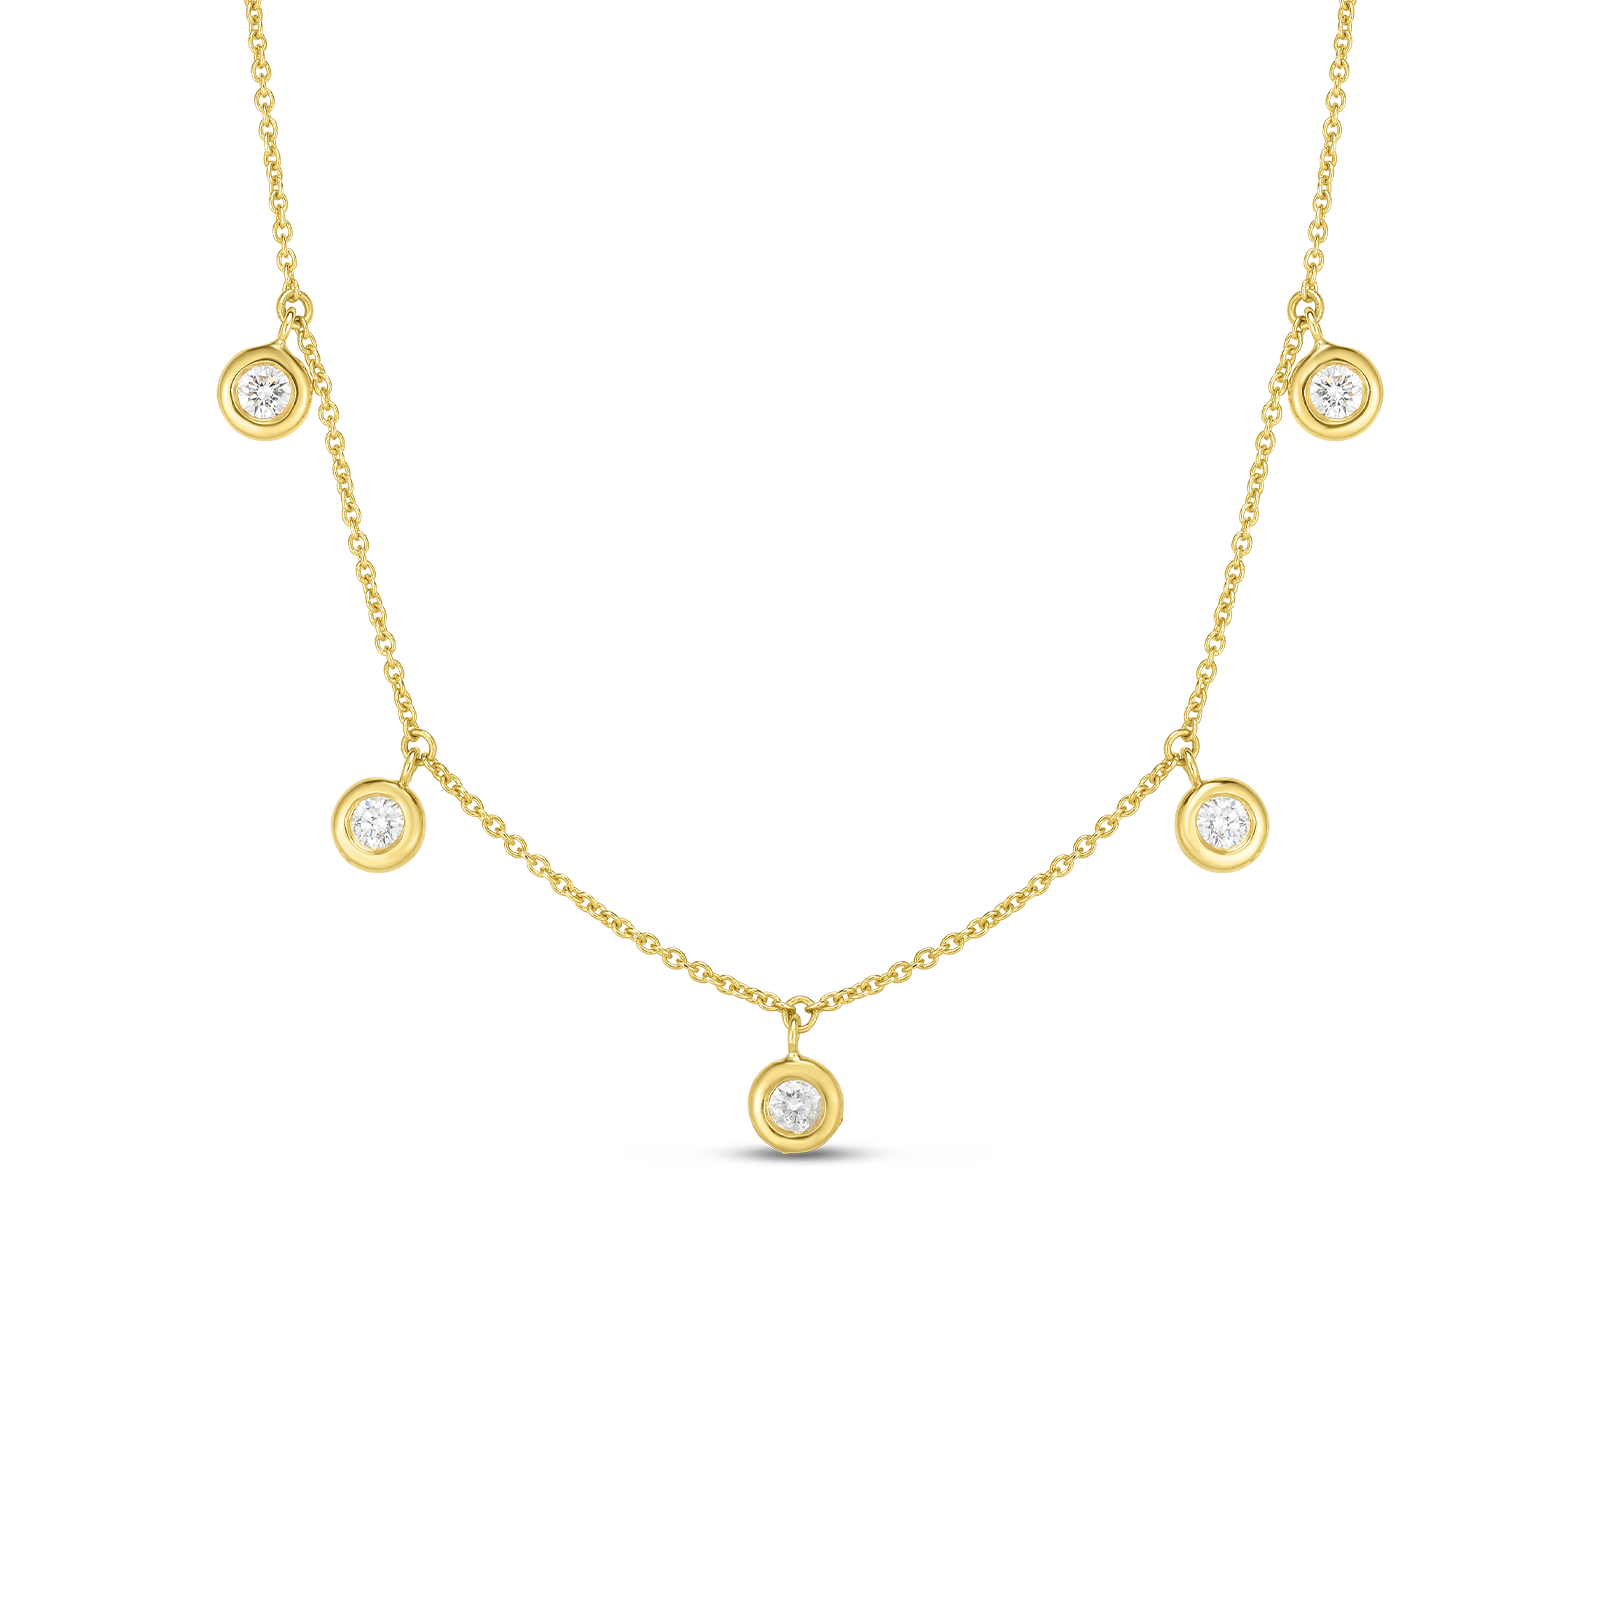 18K GOLD DIAMONDS BY THE INCH 7 STATION NECKLACE - Roberto Coin - North  America